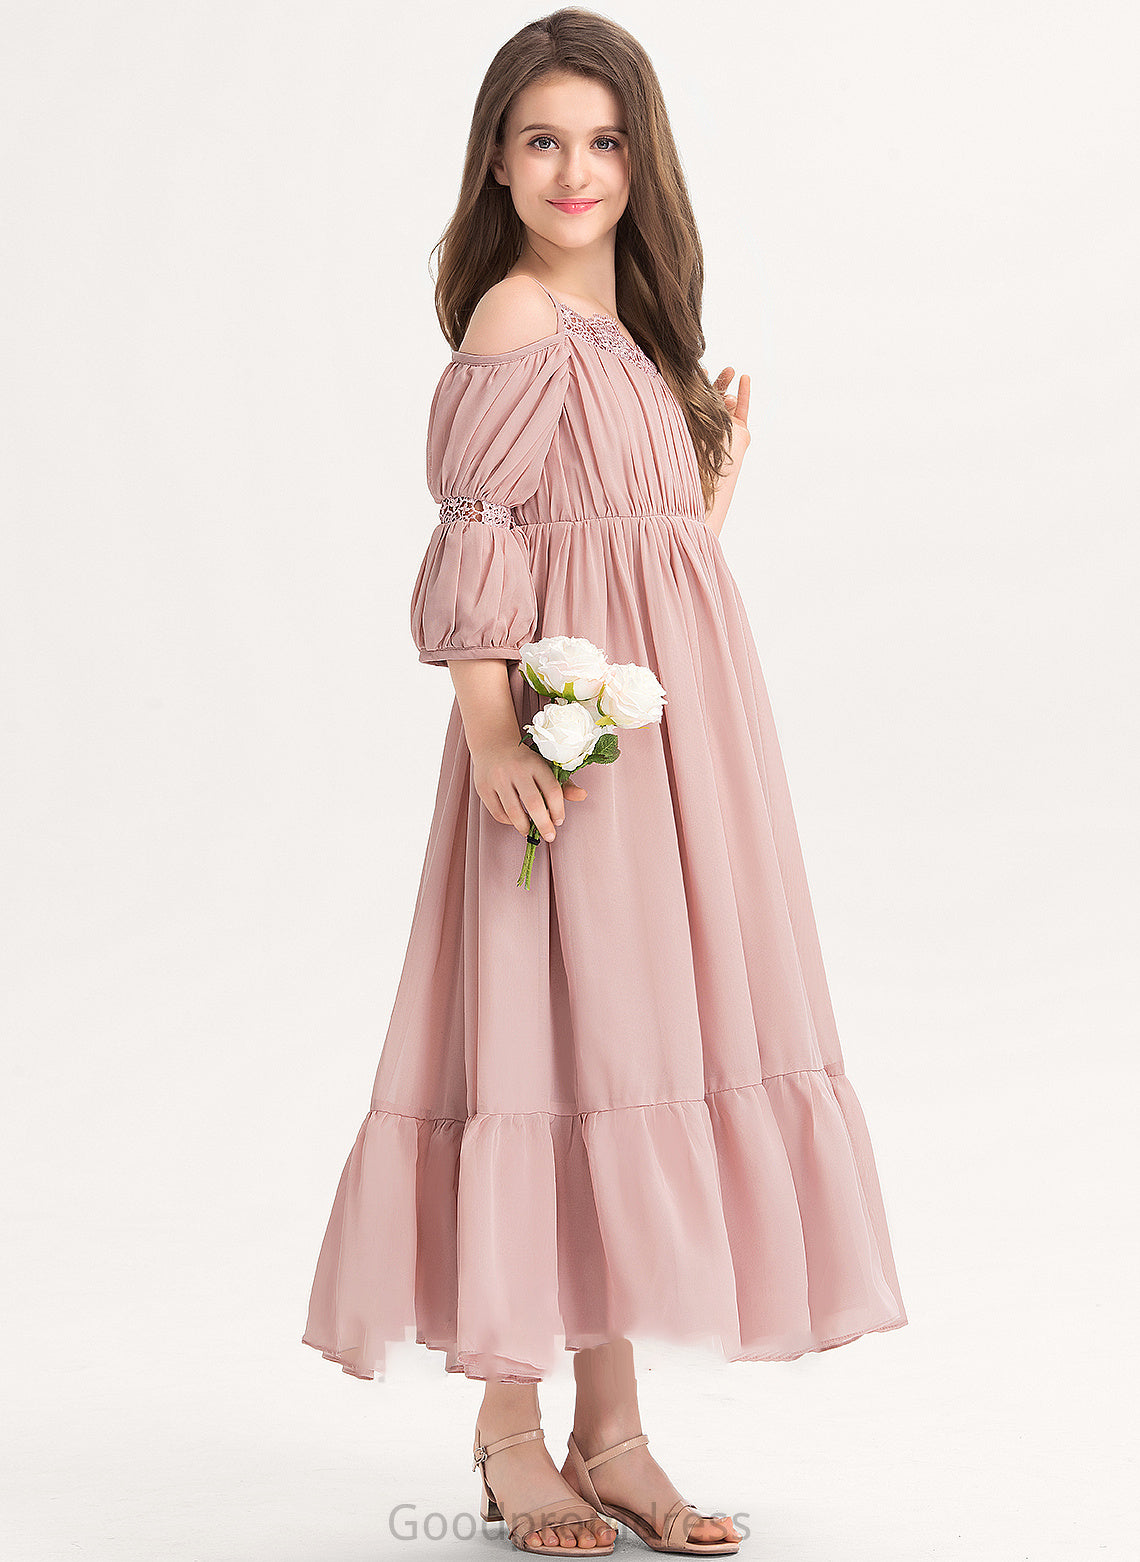 Neckline Lace Ankle-Length Square With Chiffon Ruffle A-Line Junior Bridesmaid Dresses Nina